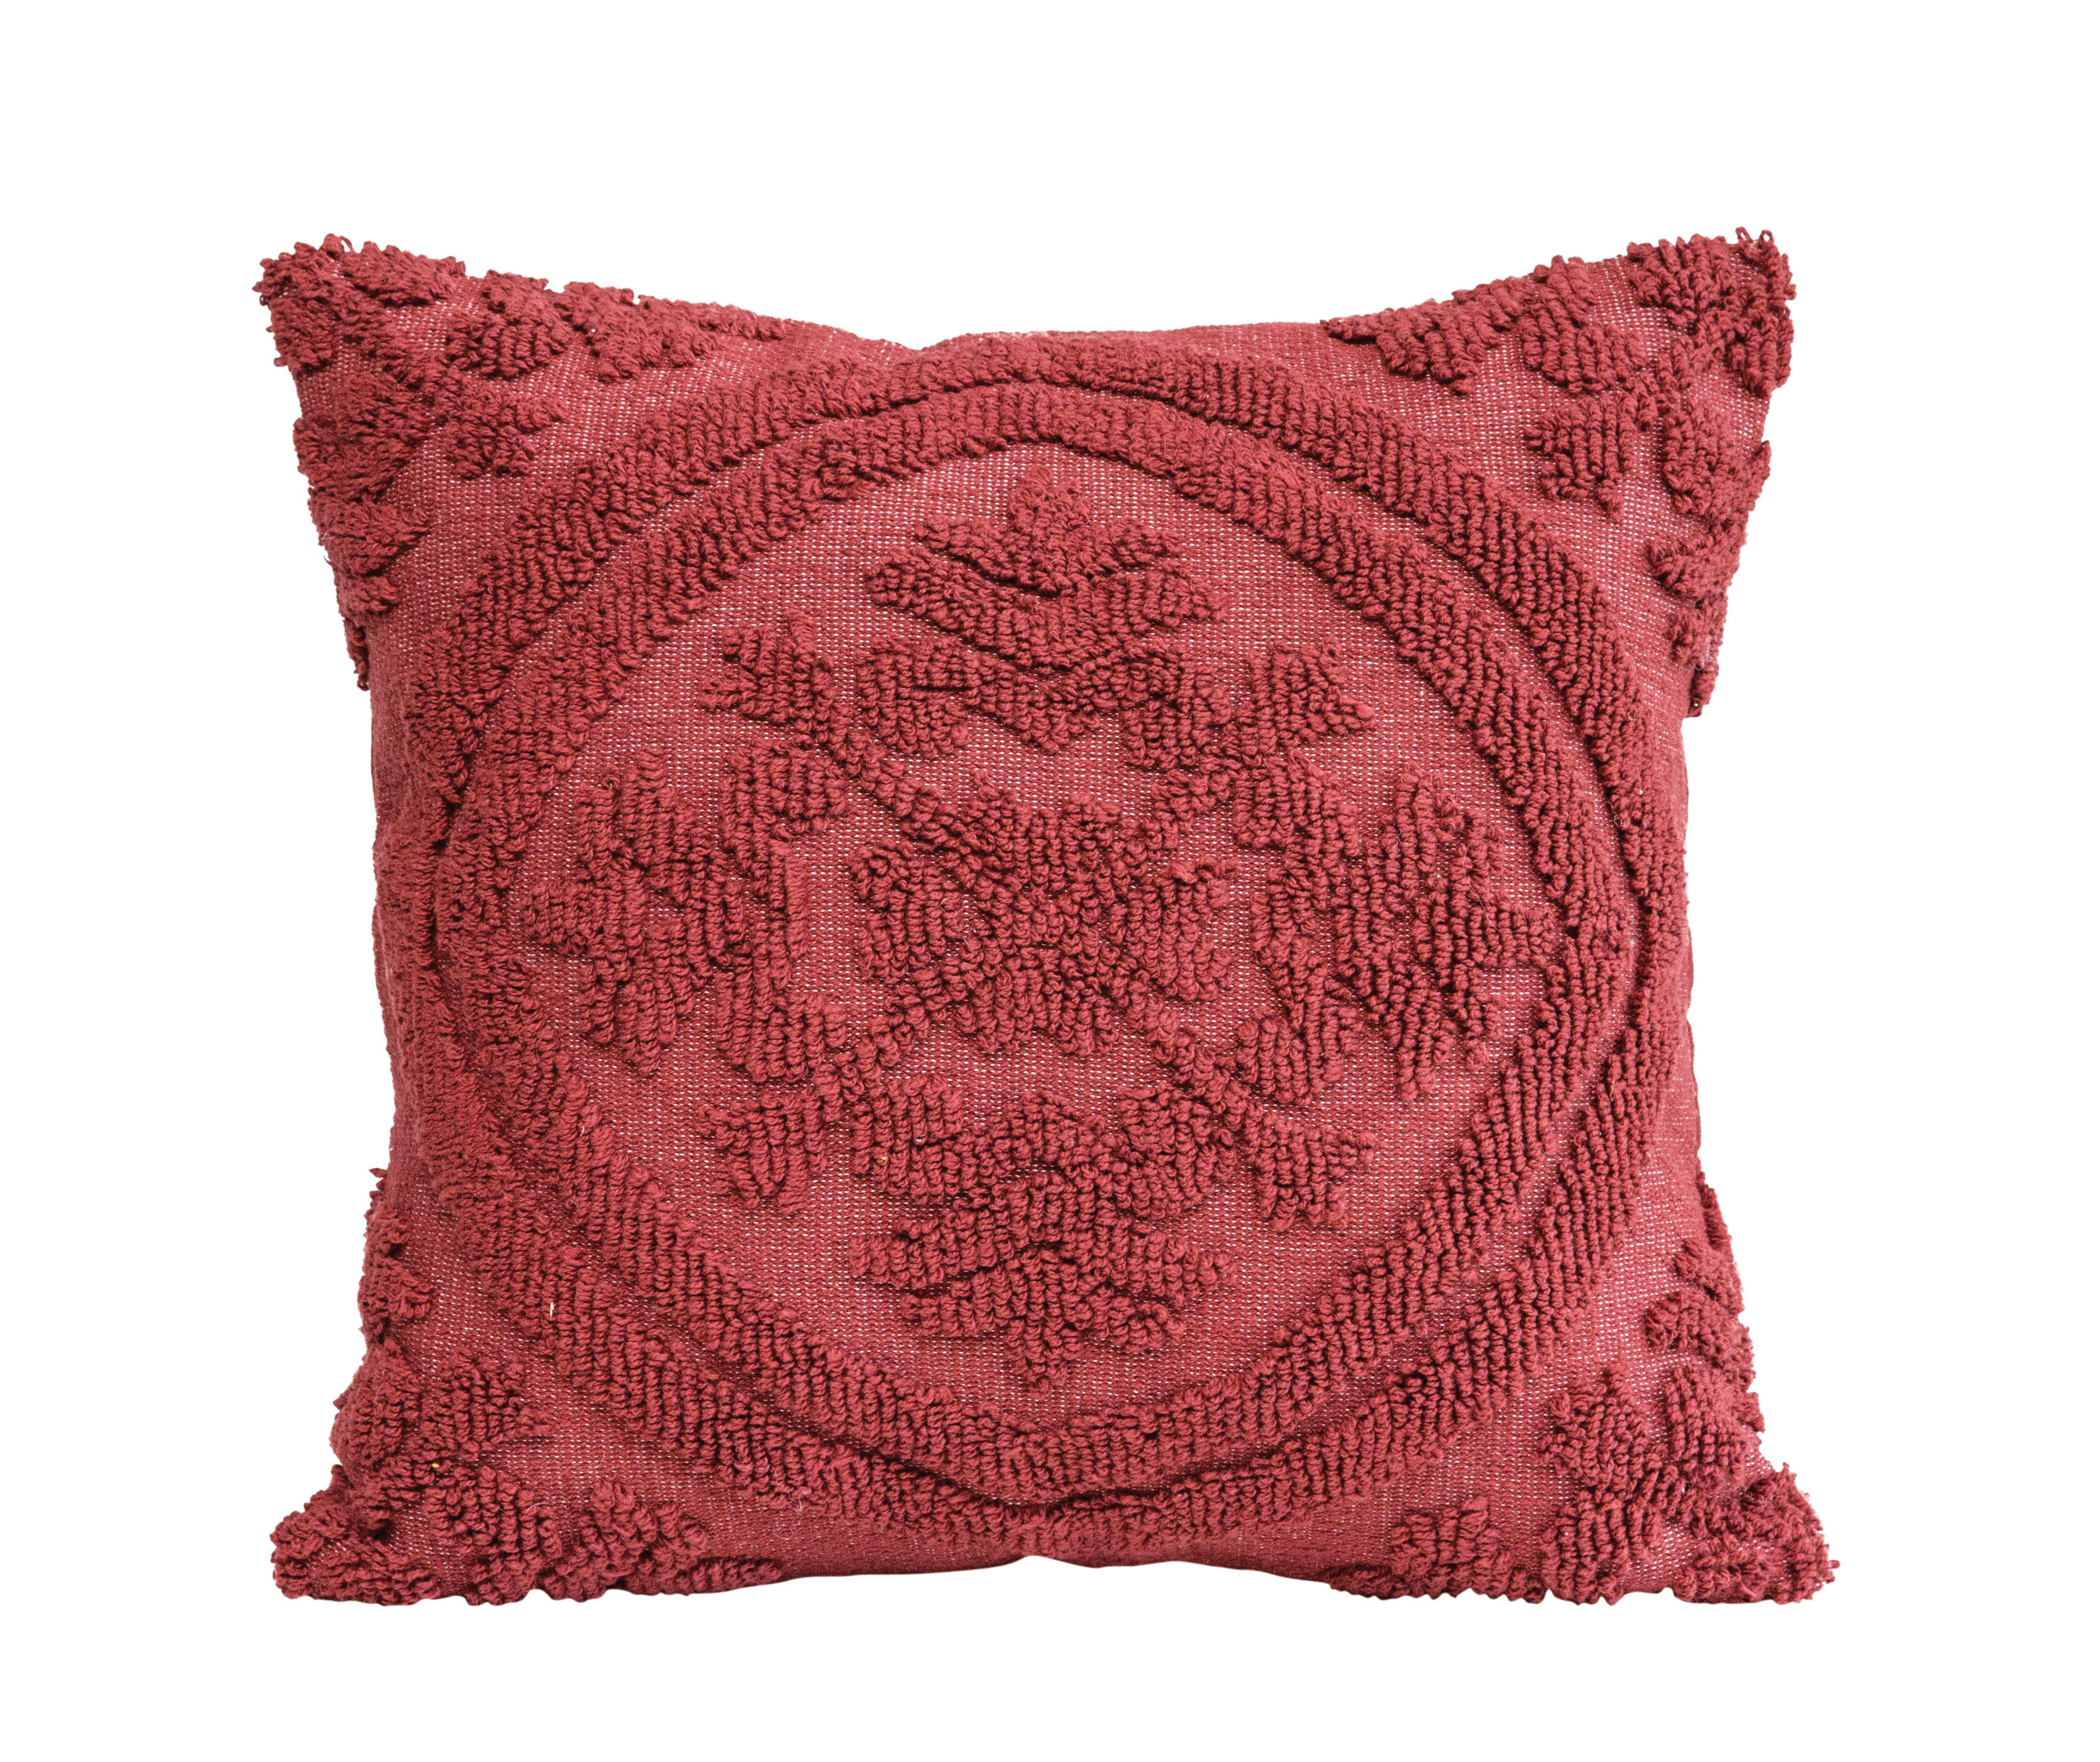 Square Woven Looped Pillow, Burgundy Cotton, 18" x 18" - Moss & Wilder